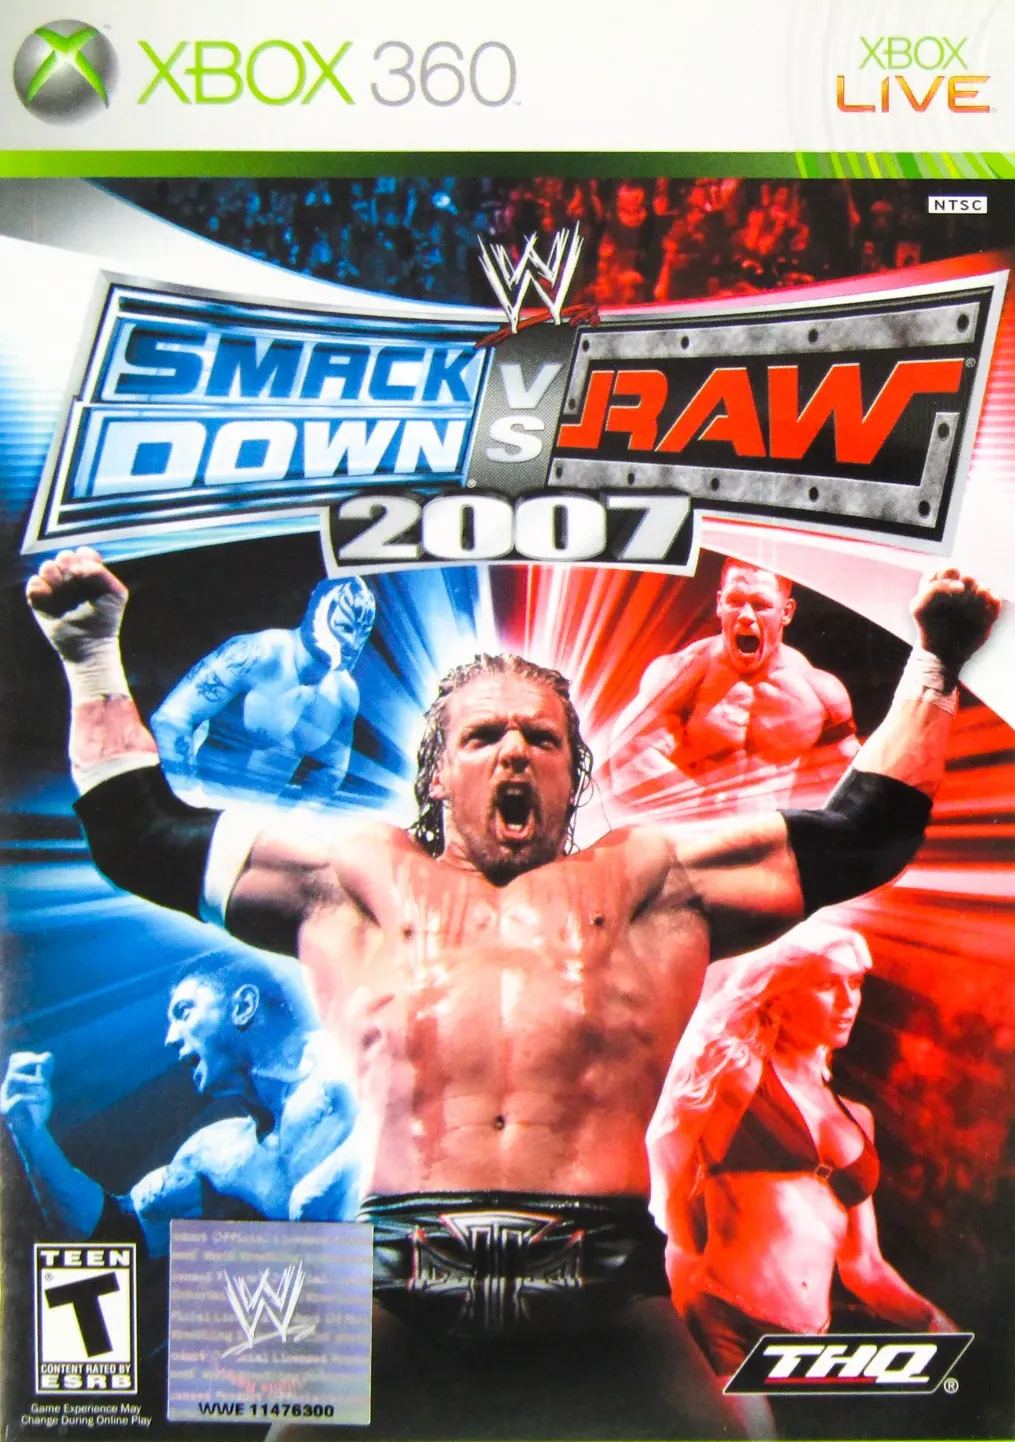 WWE Smackdown vs. Raw 2007 Video Game